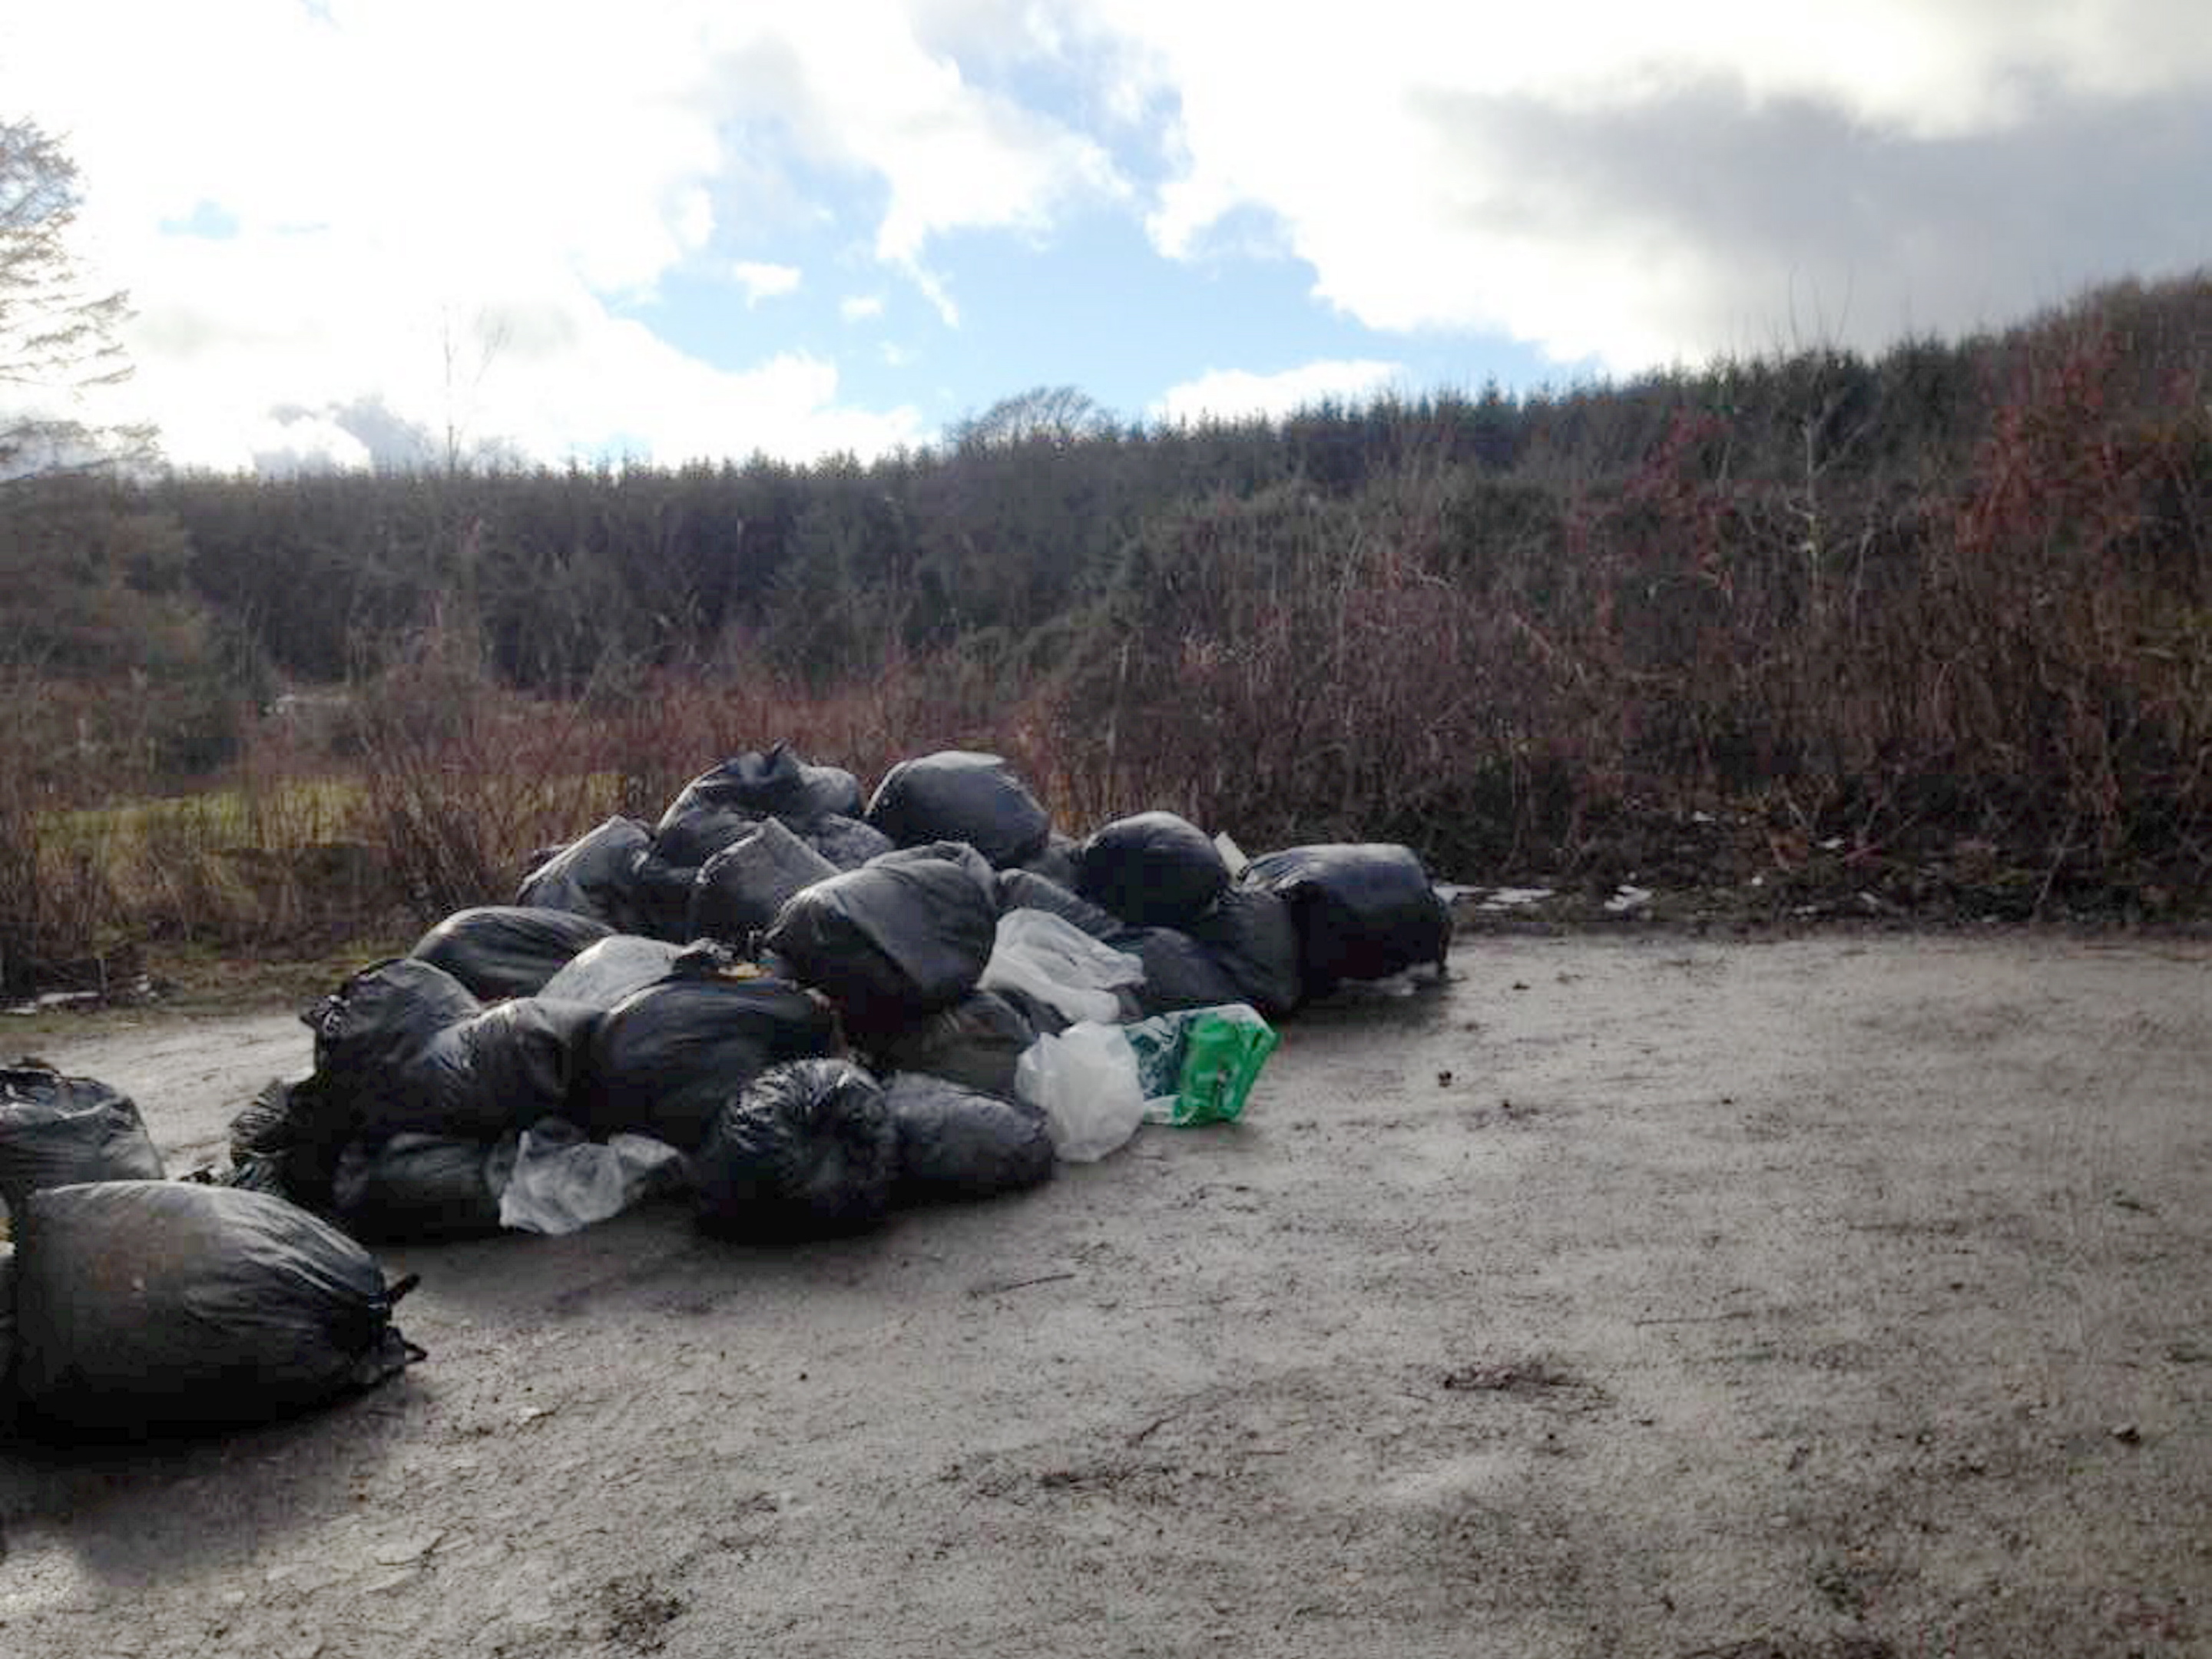 Bags of rubbish have been dumped at White Cow Wood near Mintlaw.